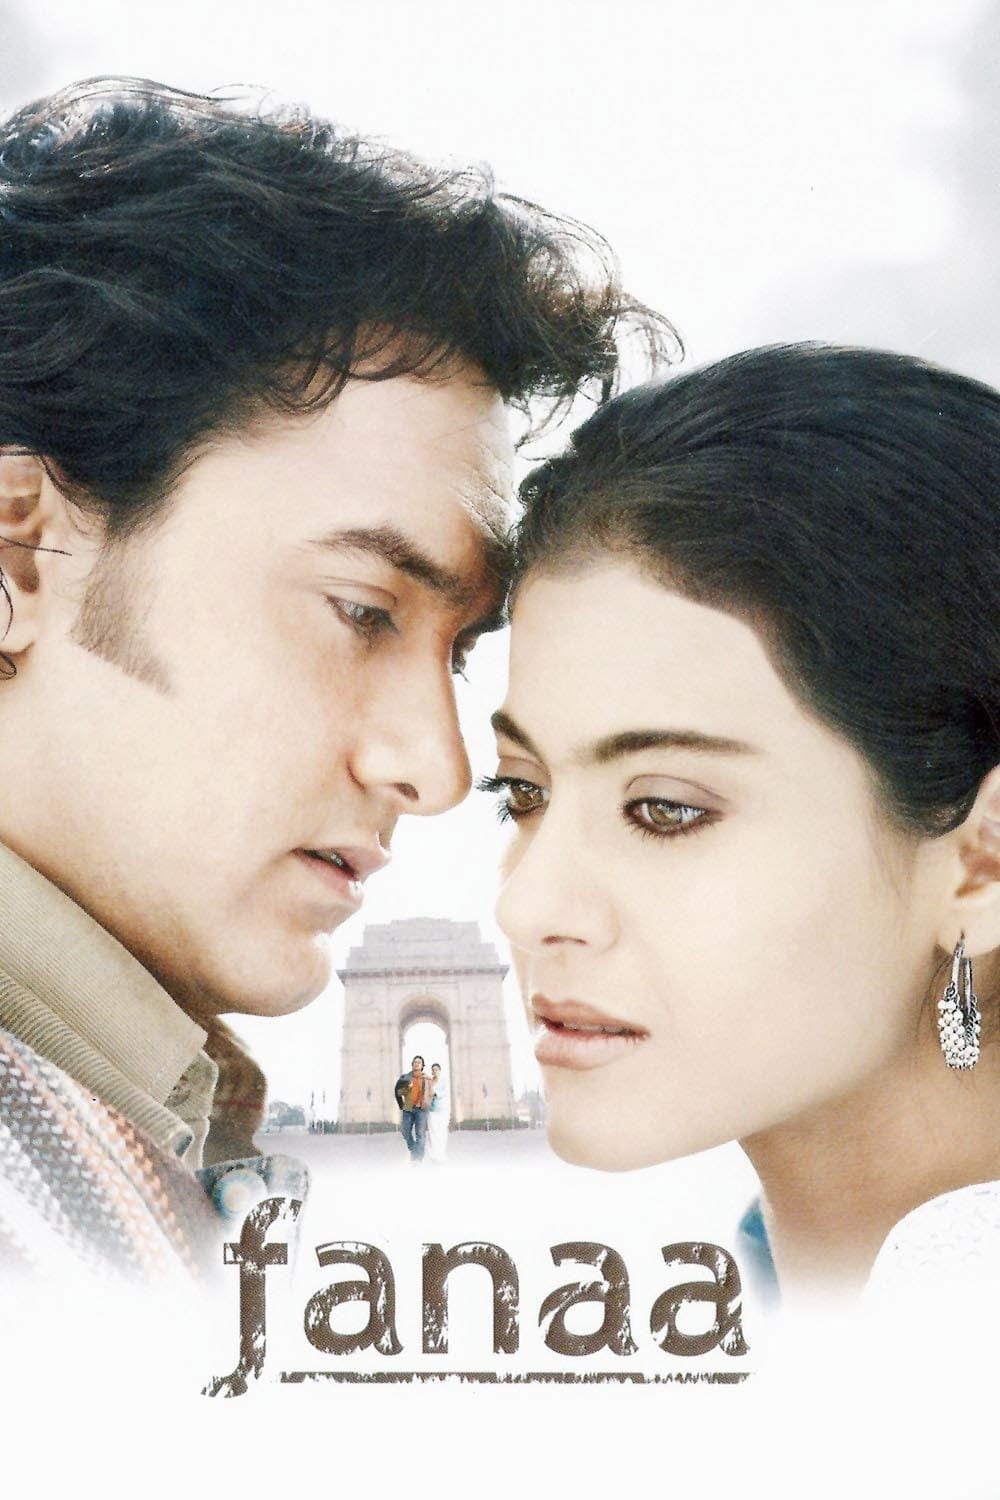 Poster for the movie "Fanaa"